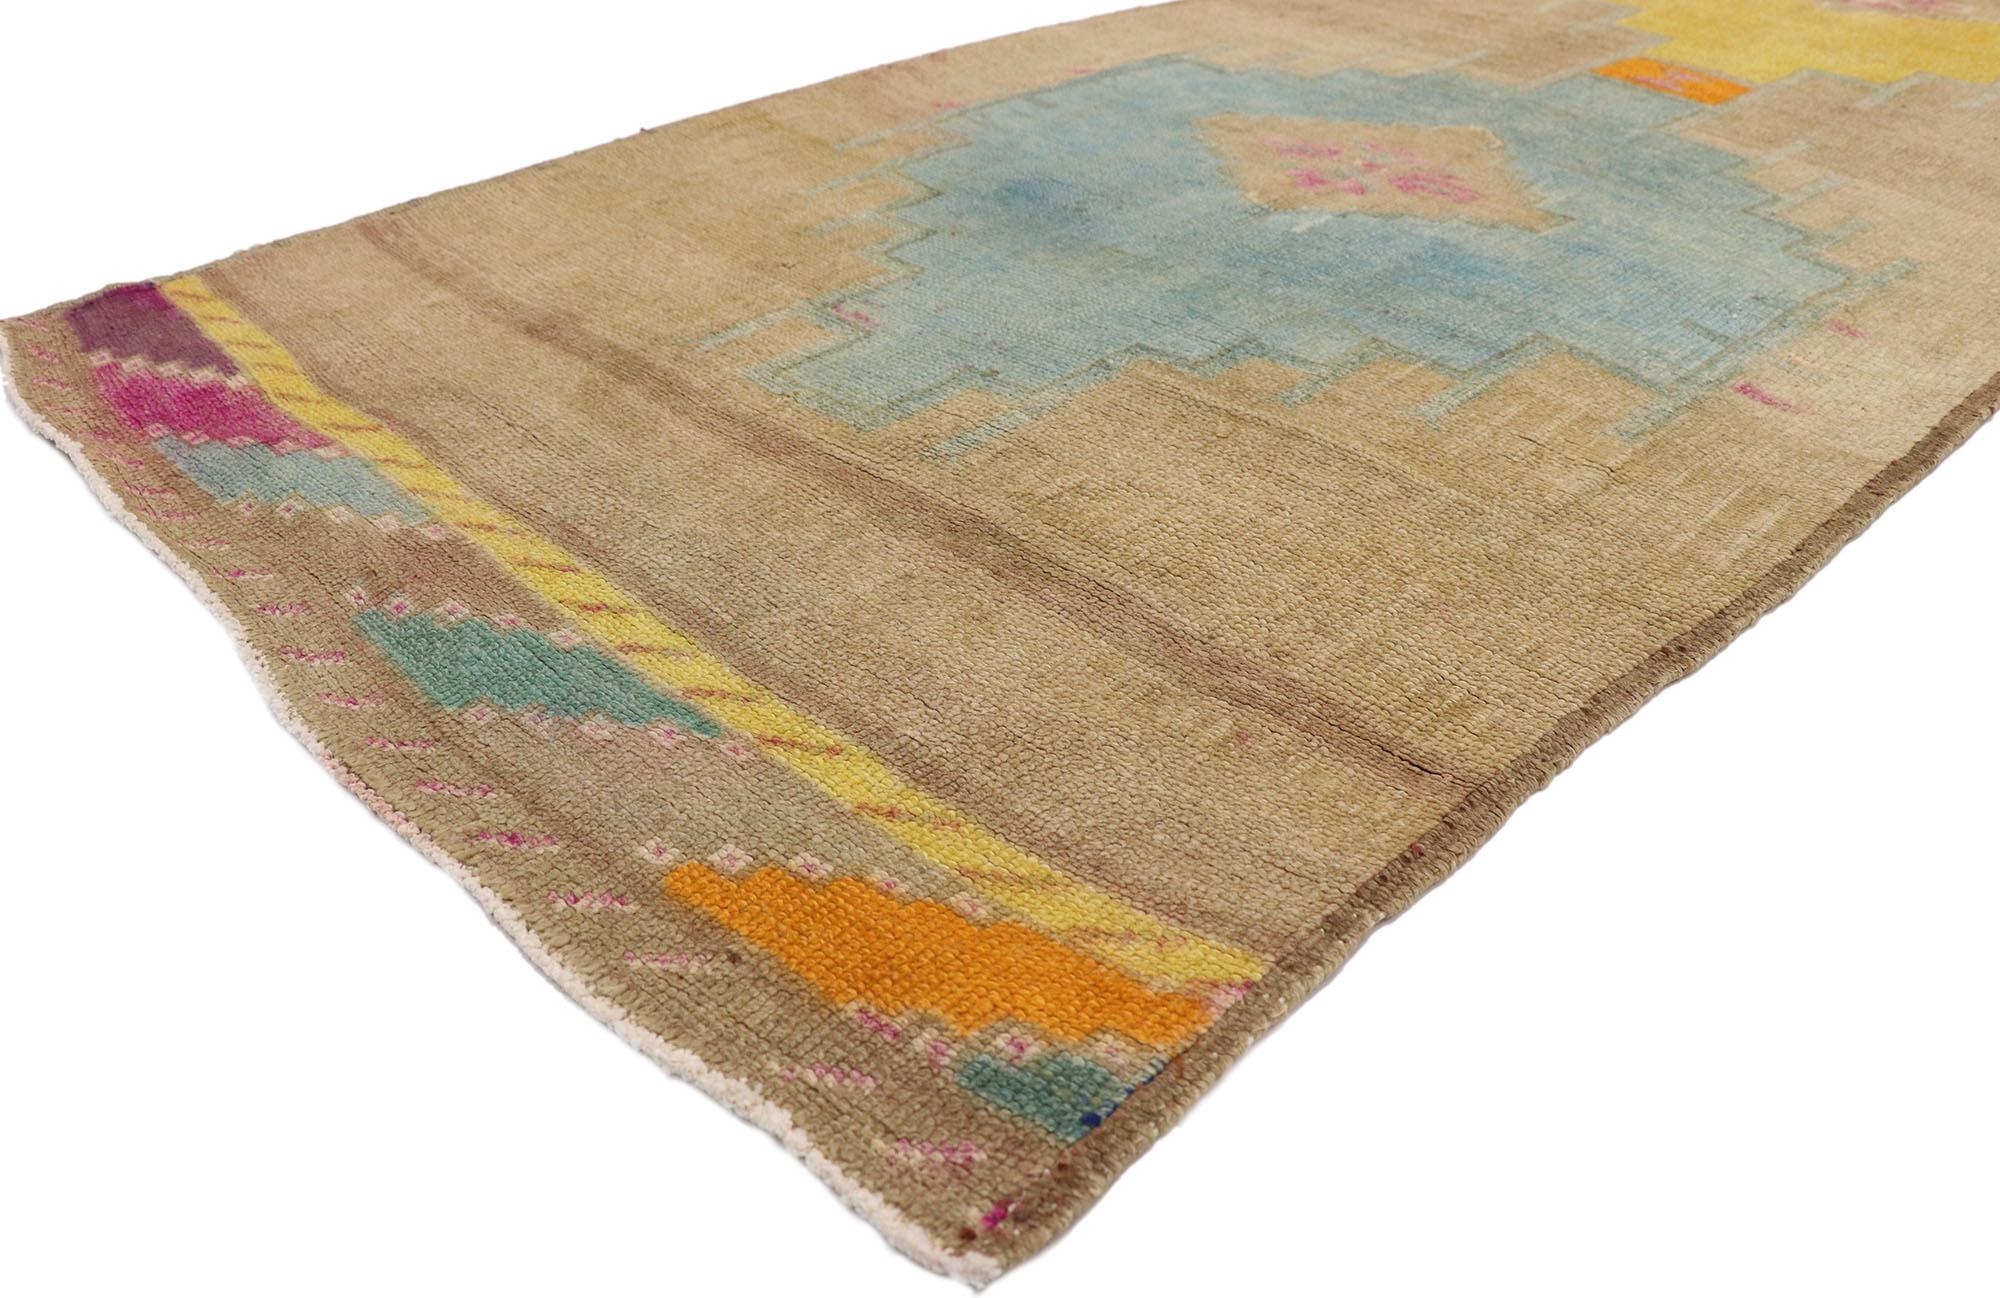 51840 Vintage Turkish Oushak Runner with Retro Mid-Century Modern Style, Extra-Long Hallway Runner 03'04 x 21'07. With a bold geometric form and retro flair, this hand knotted wool vintage Turkish Oushak runner astounds with its beauty. It features